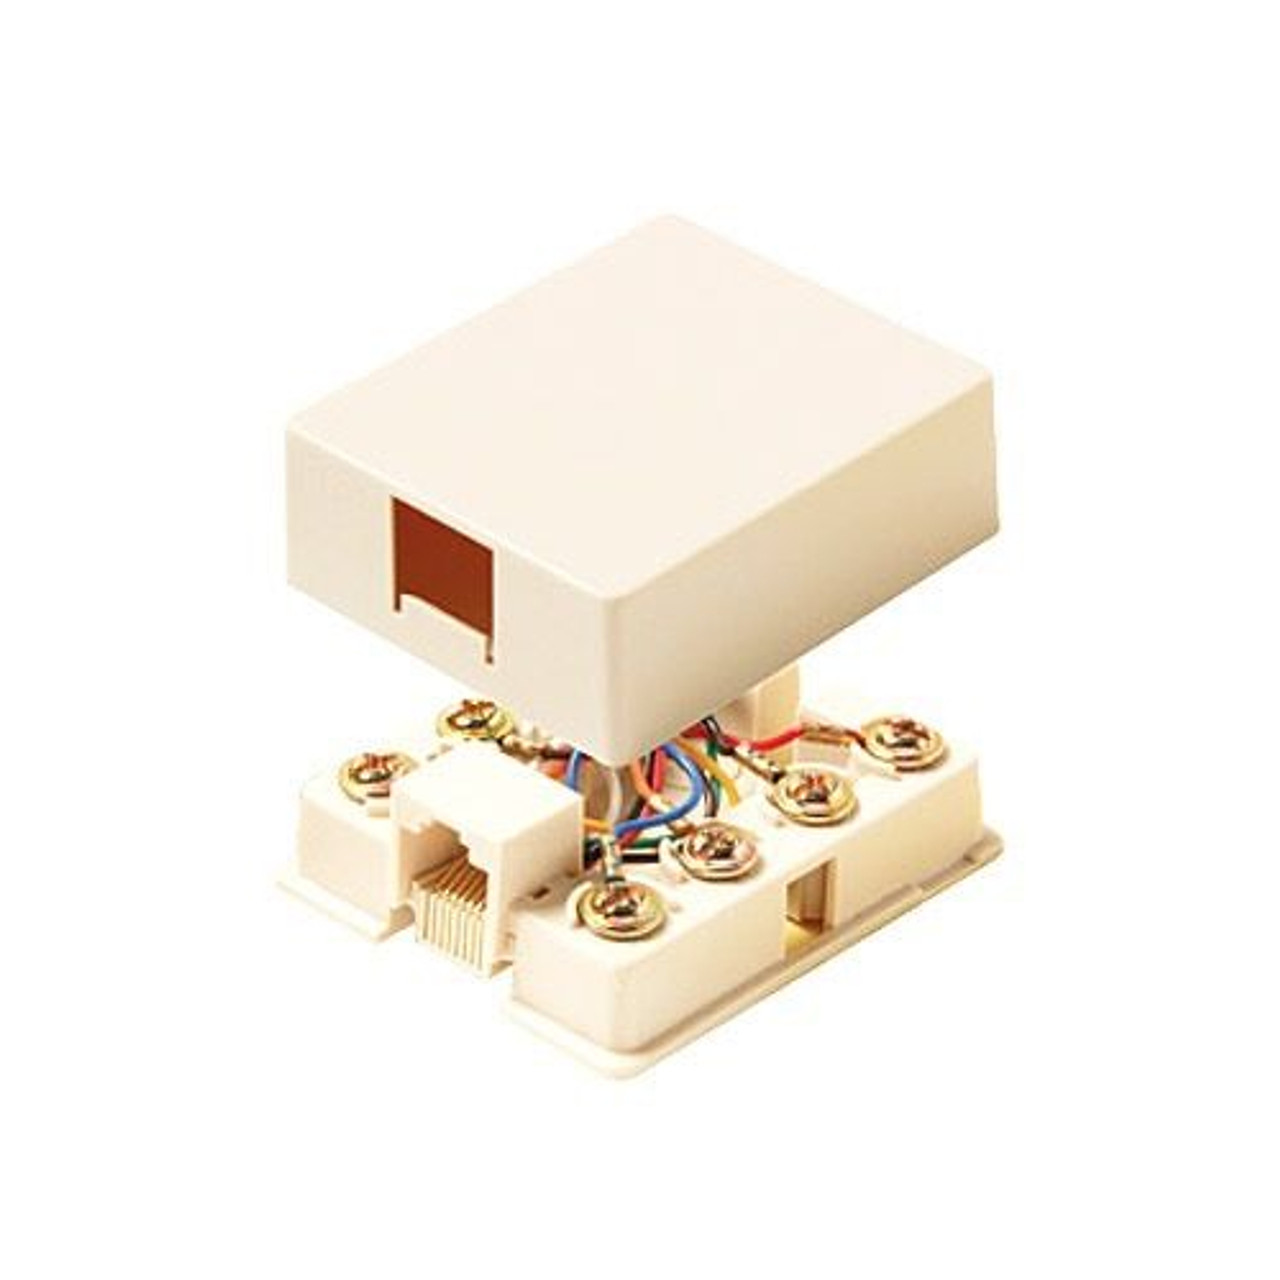 Eagle Surface Mount Phone RJ11 Jack Ivory Surface Mount 4 Conductor Surface Block Mount Modular Audio Signal Telephone Line Cable Connect Wall Box Plug